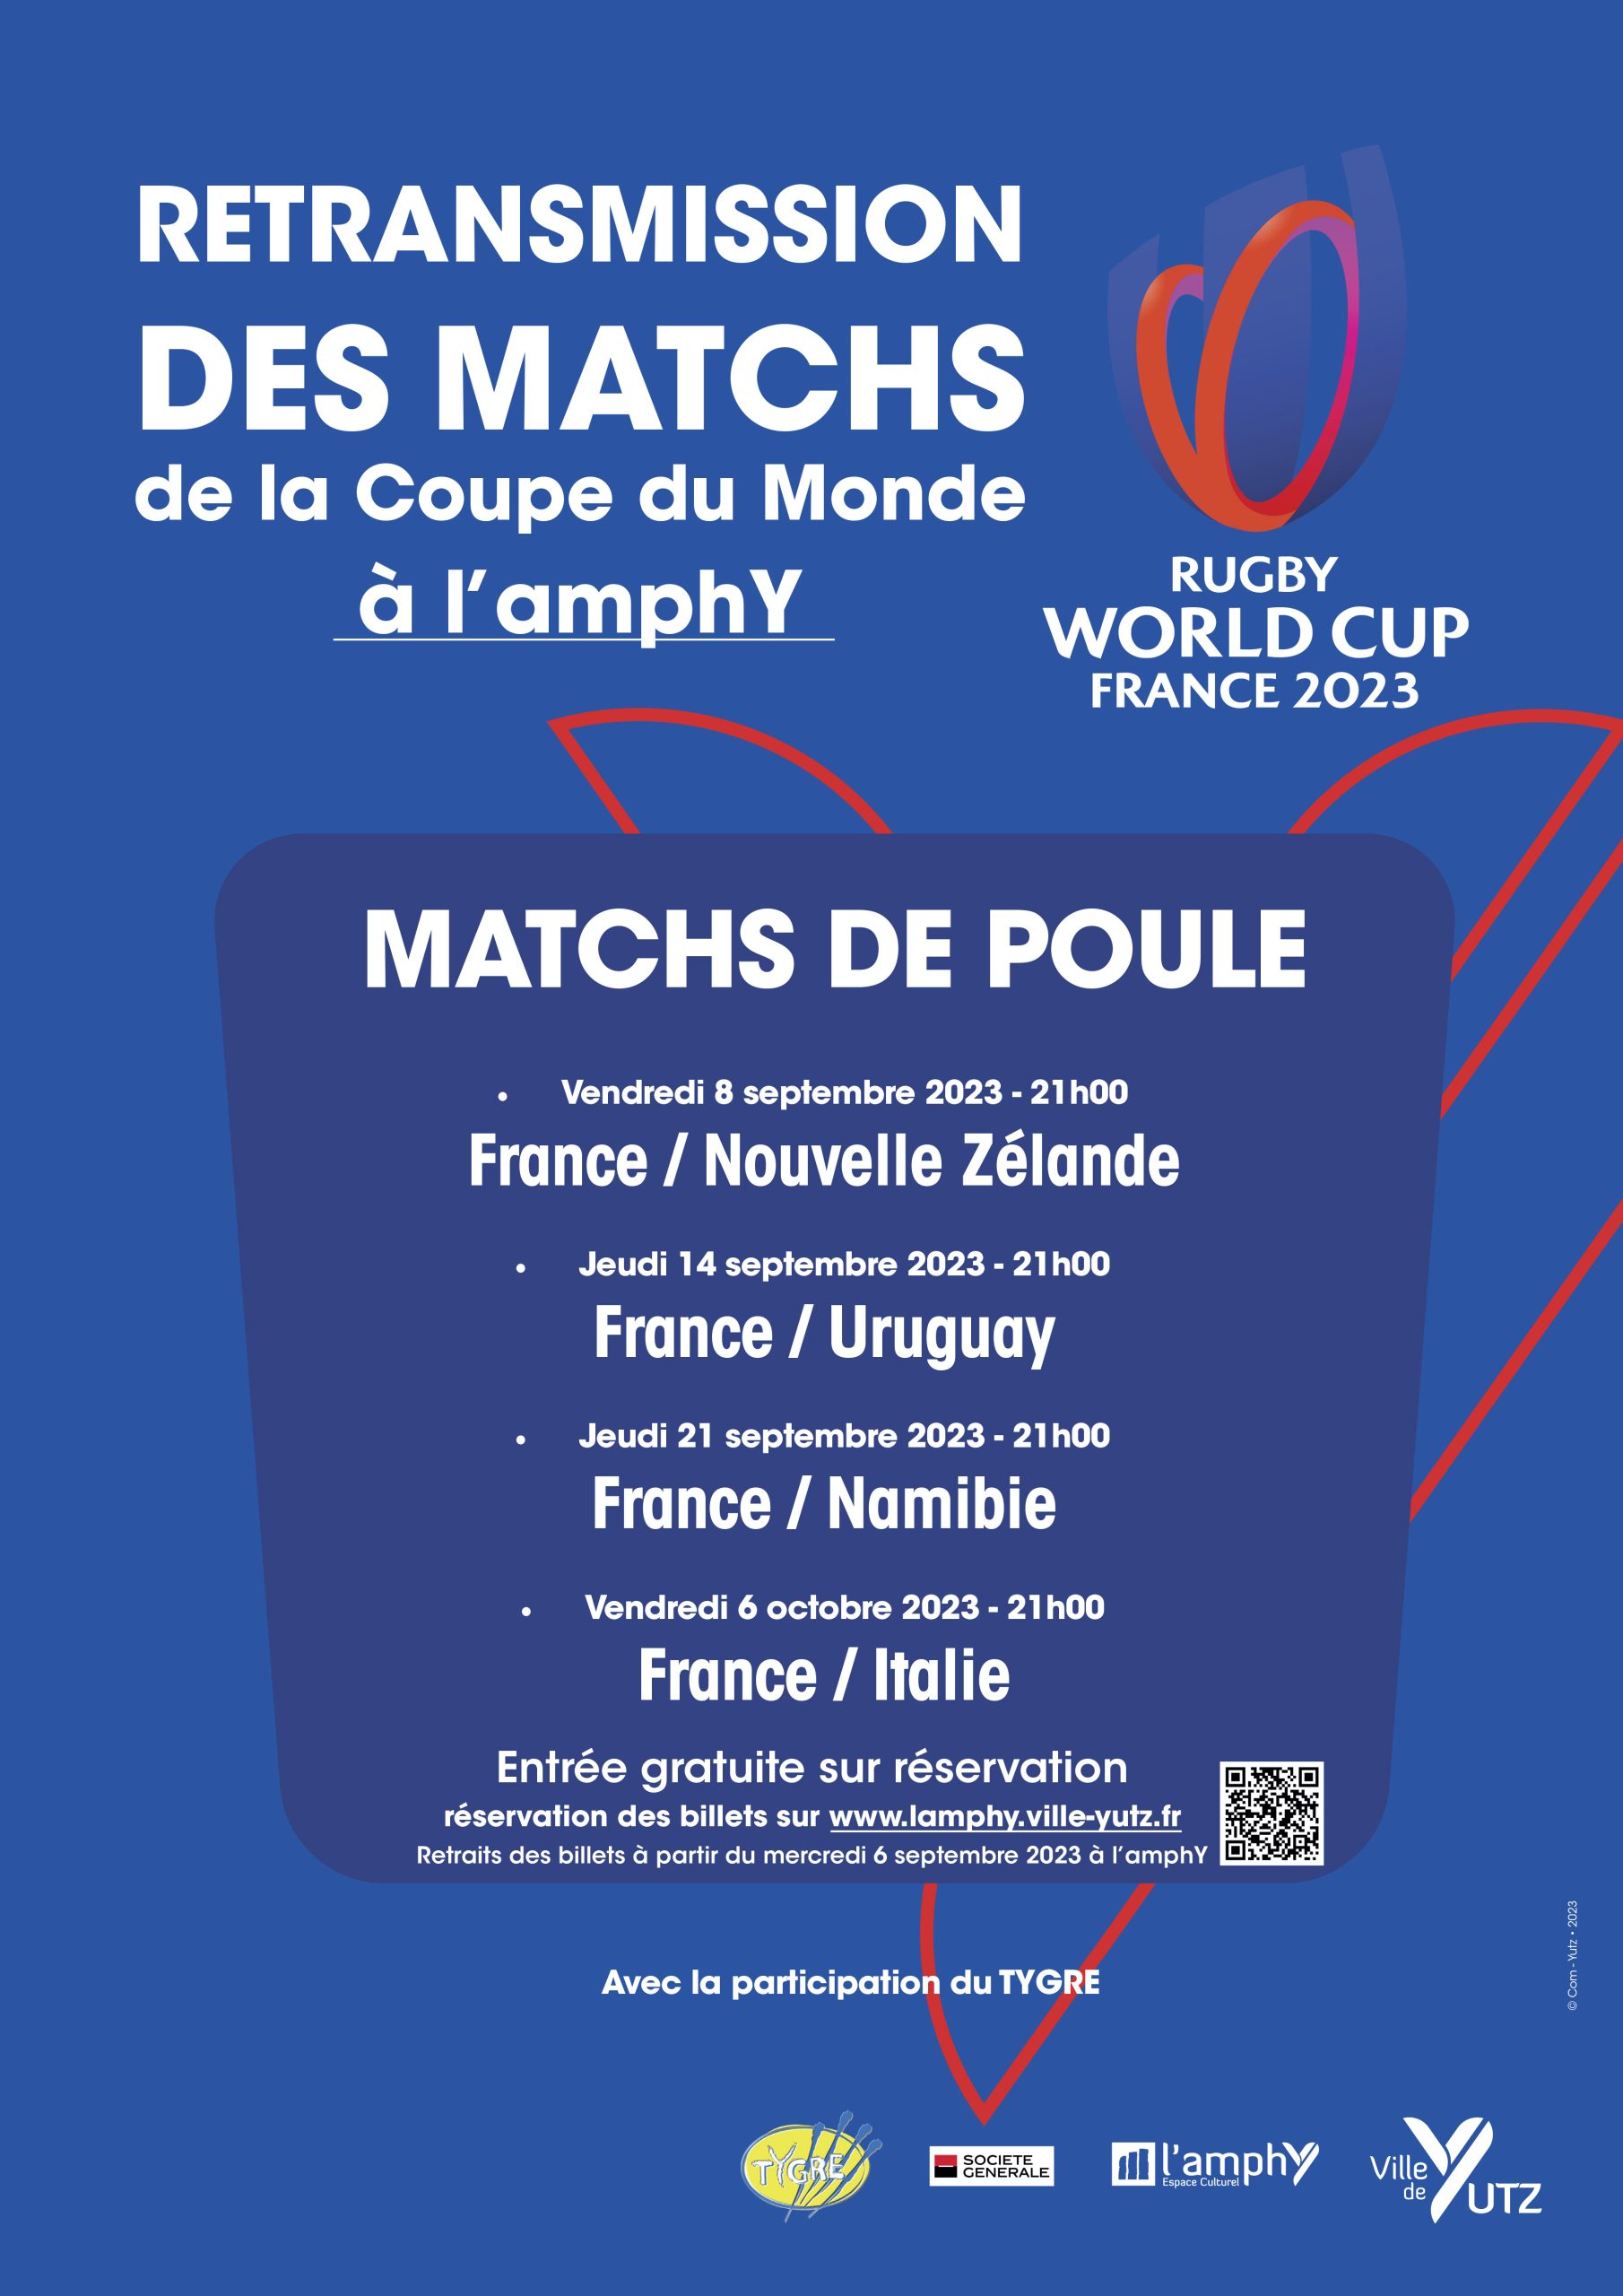 Retransmission of the Rugby Match: France / Namibia